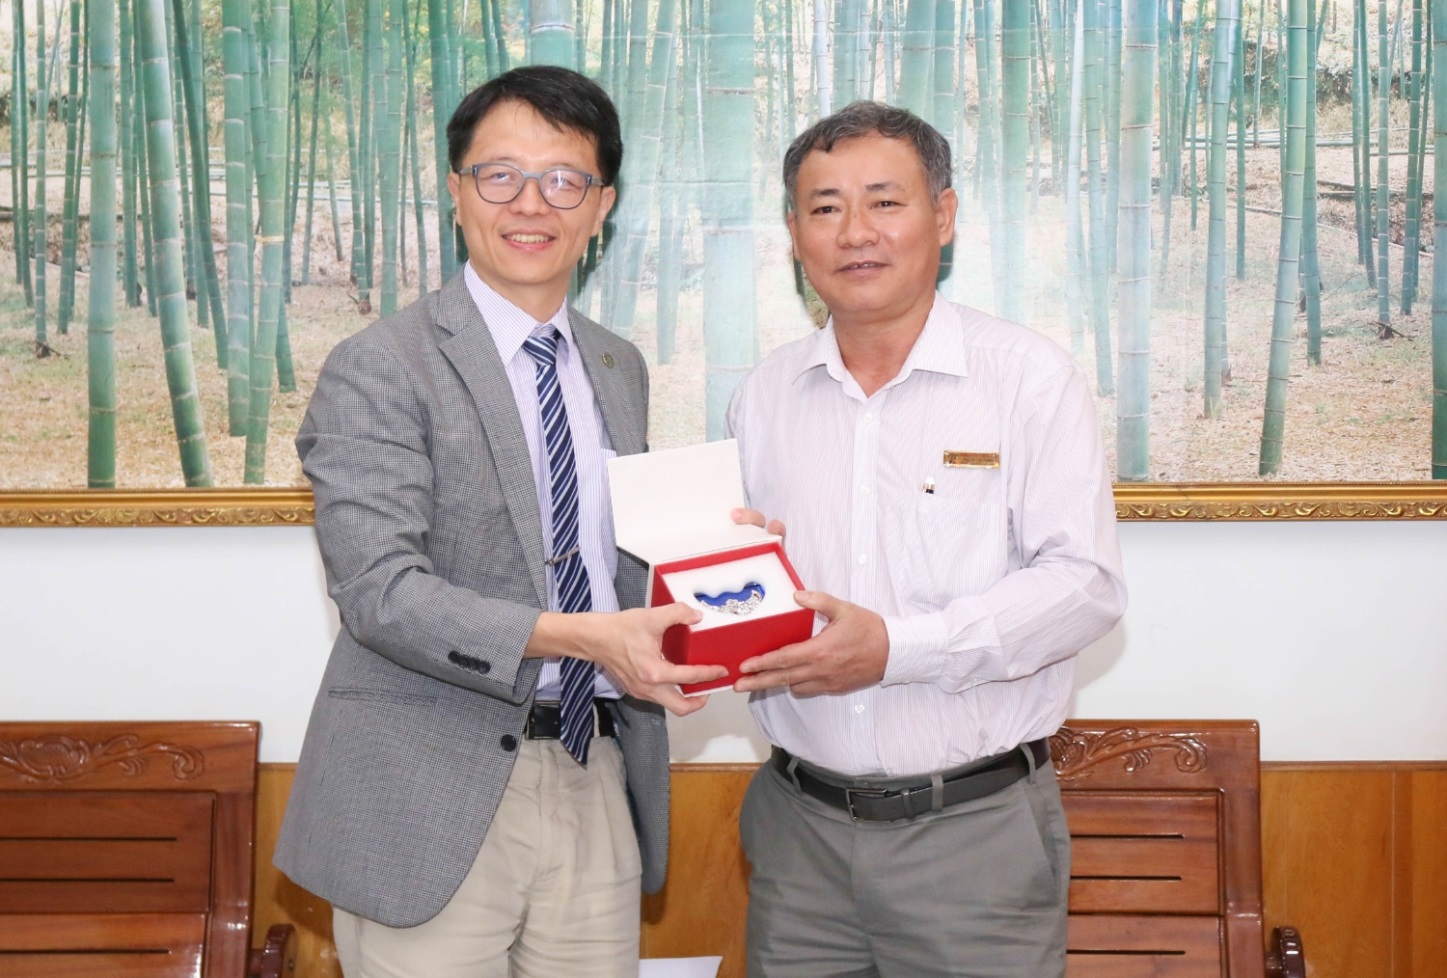 Prof. Hsiang-Lin Liu - Vice President for International Affairs, National Taiwan Normal University (left hand side) gave the souvenir to Assoc.Prof. Dr. Luu Trang - Rector of the University (right hand side)